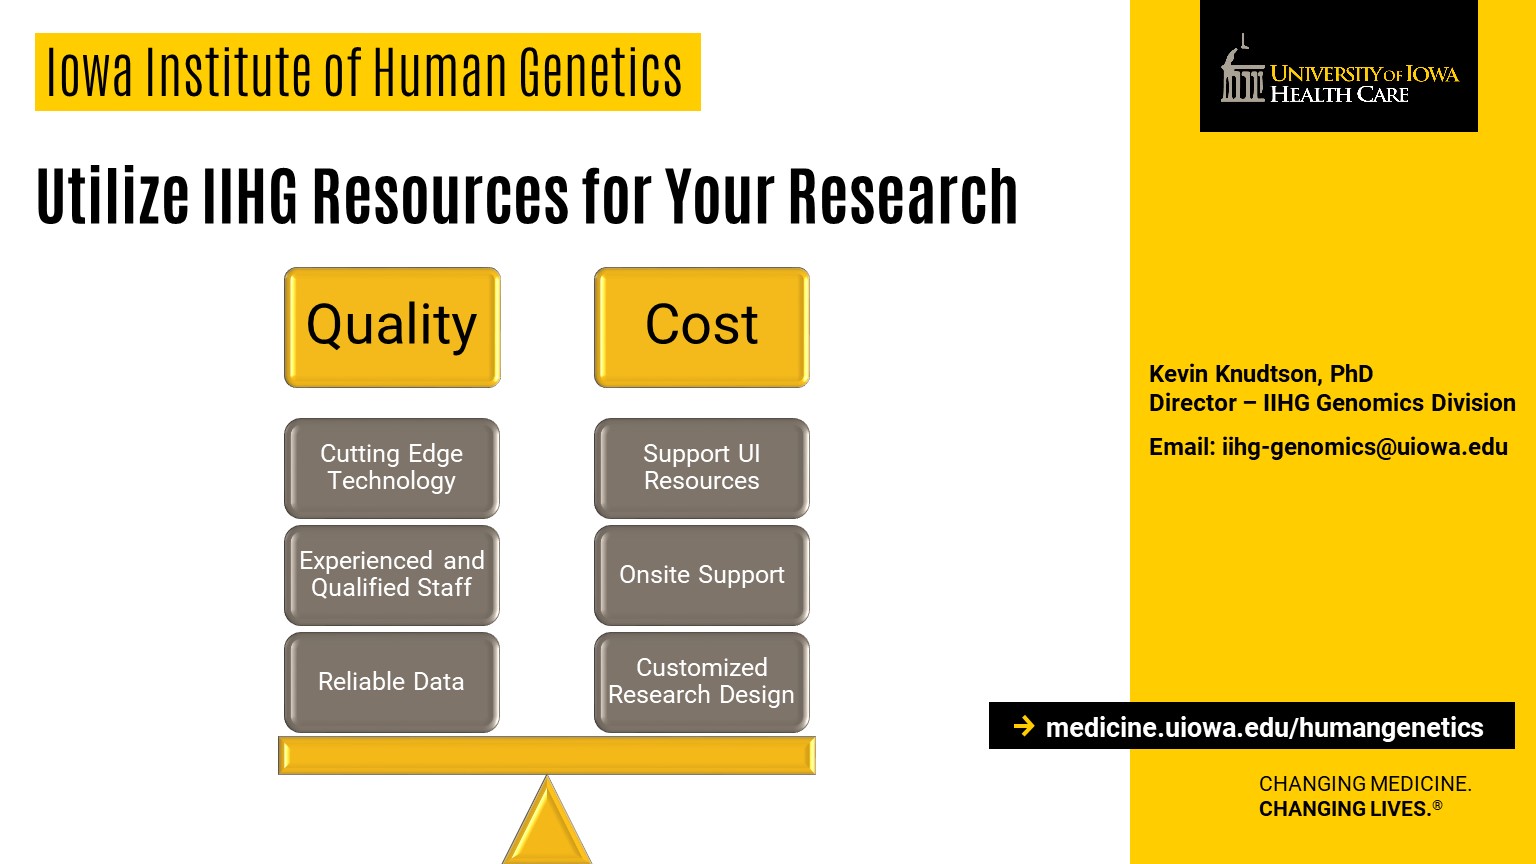 IIHG Resources - Cost and Quality